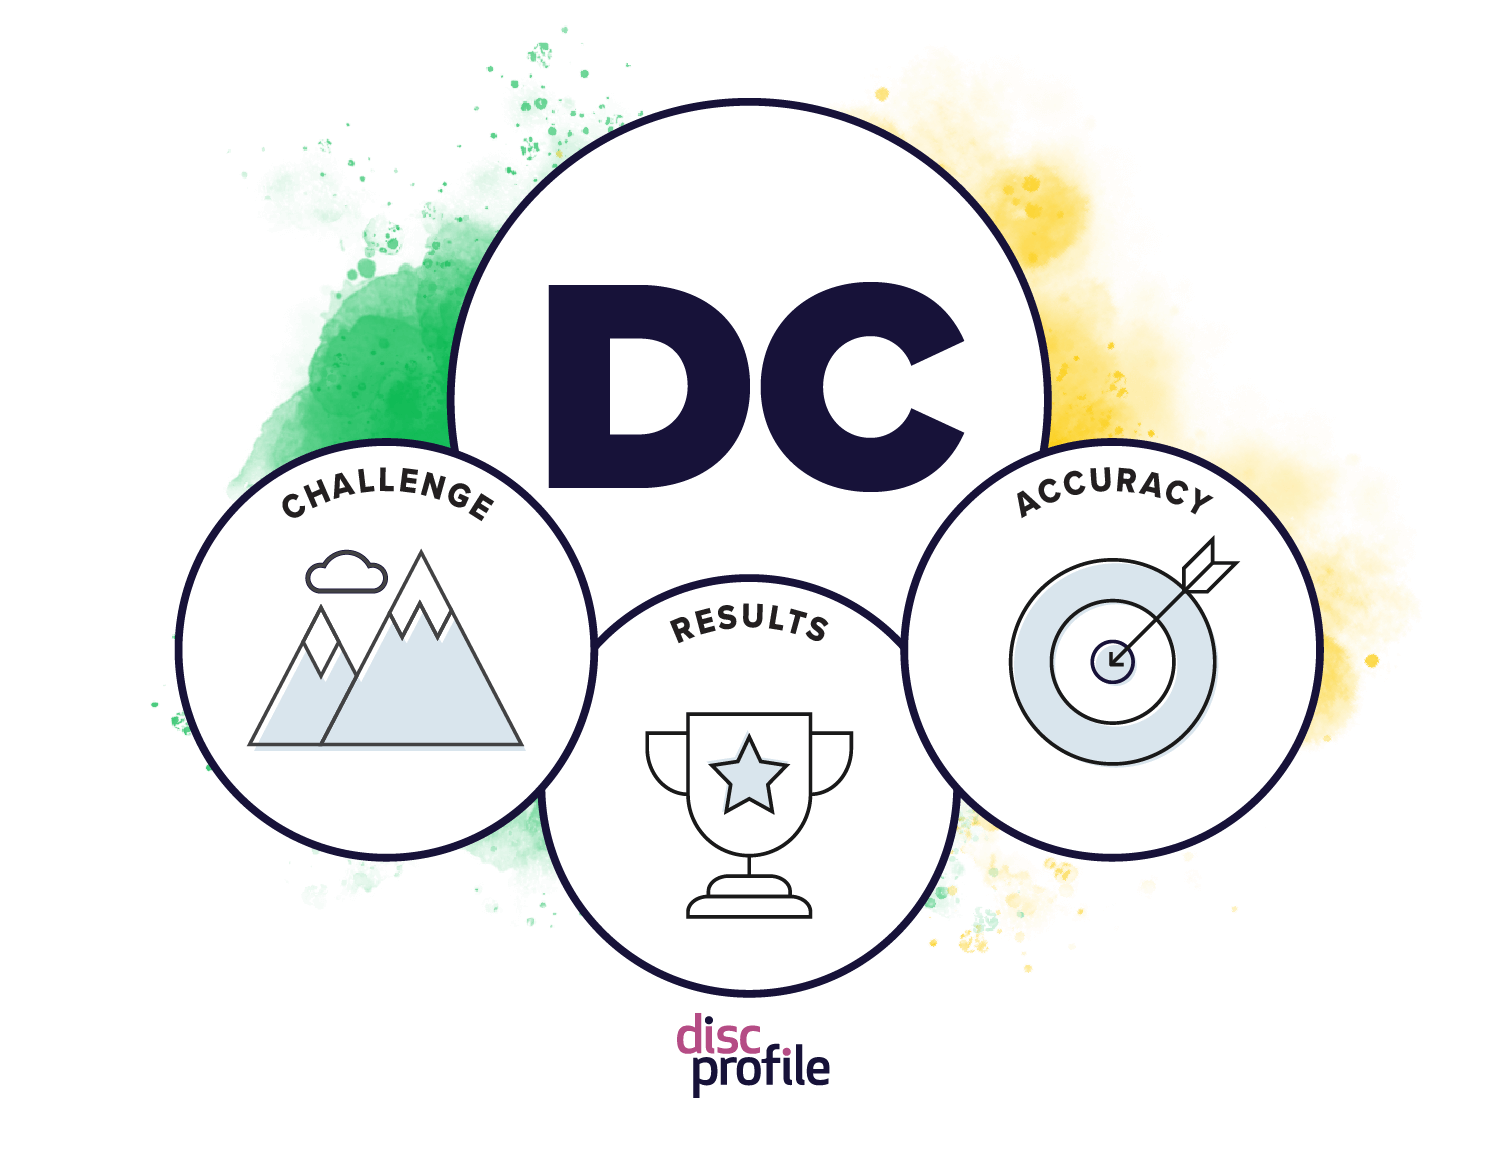 DC style graphic showing these priorities: challenge, results, accuracy